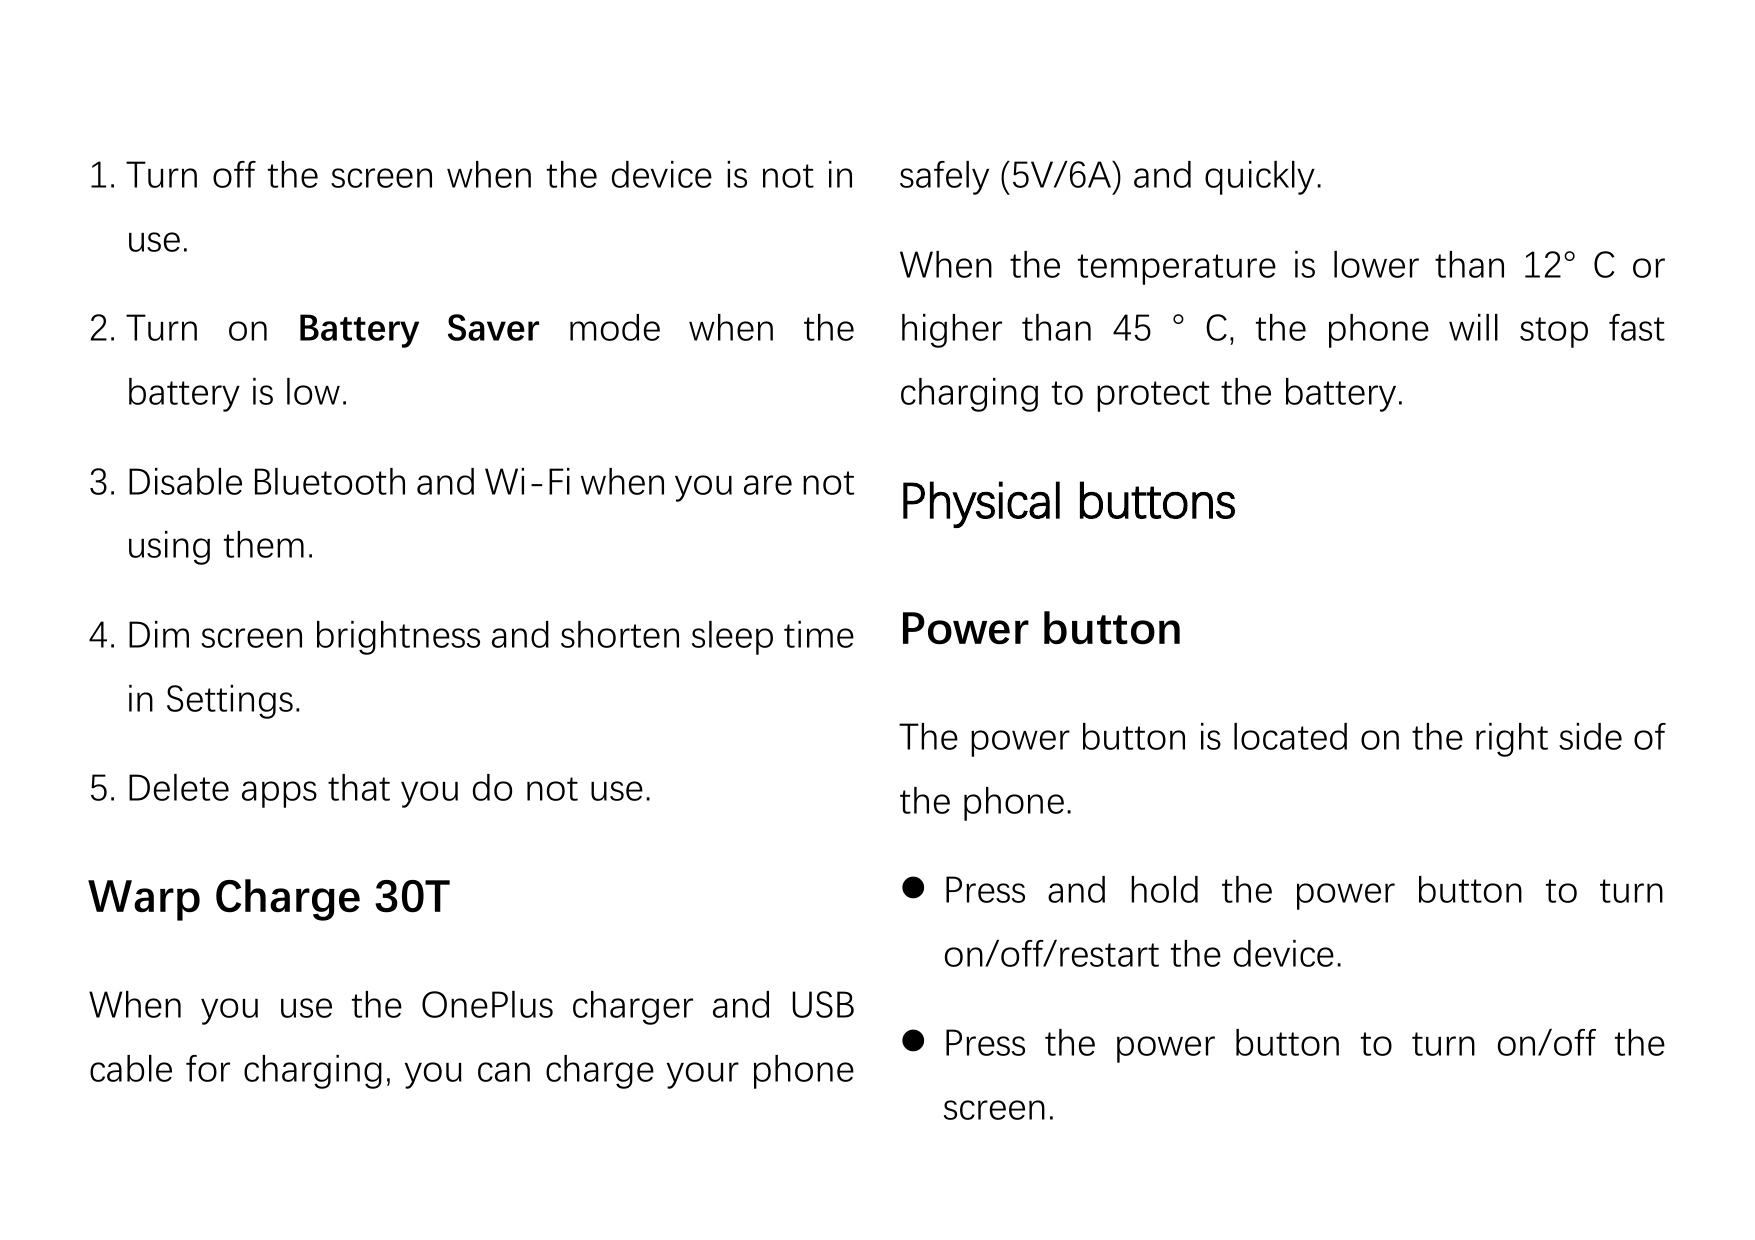 1. Turn off the screen when the device is not inuse.2. Turn on Battery Saver mode when thebattery is low.3. Disable Bluetooth an